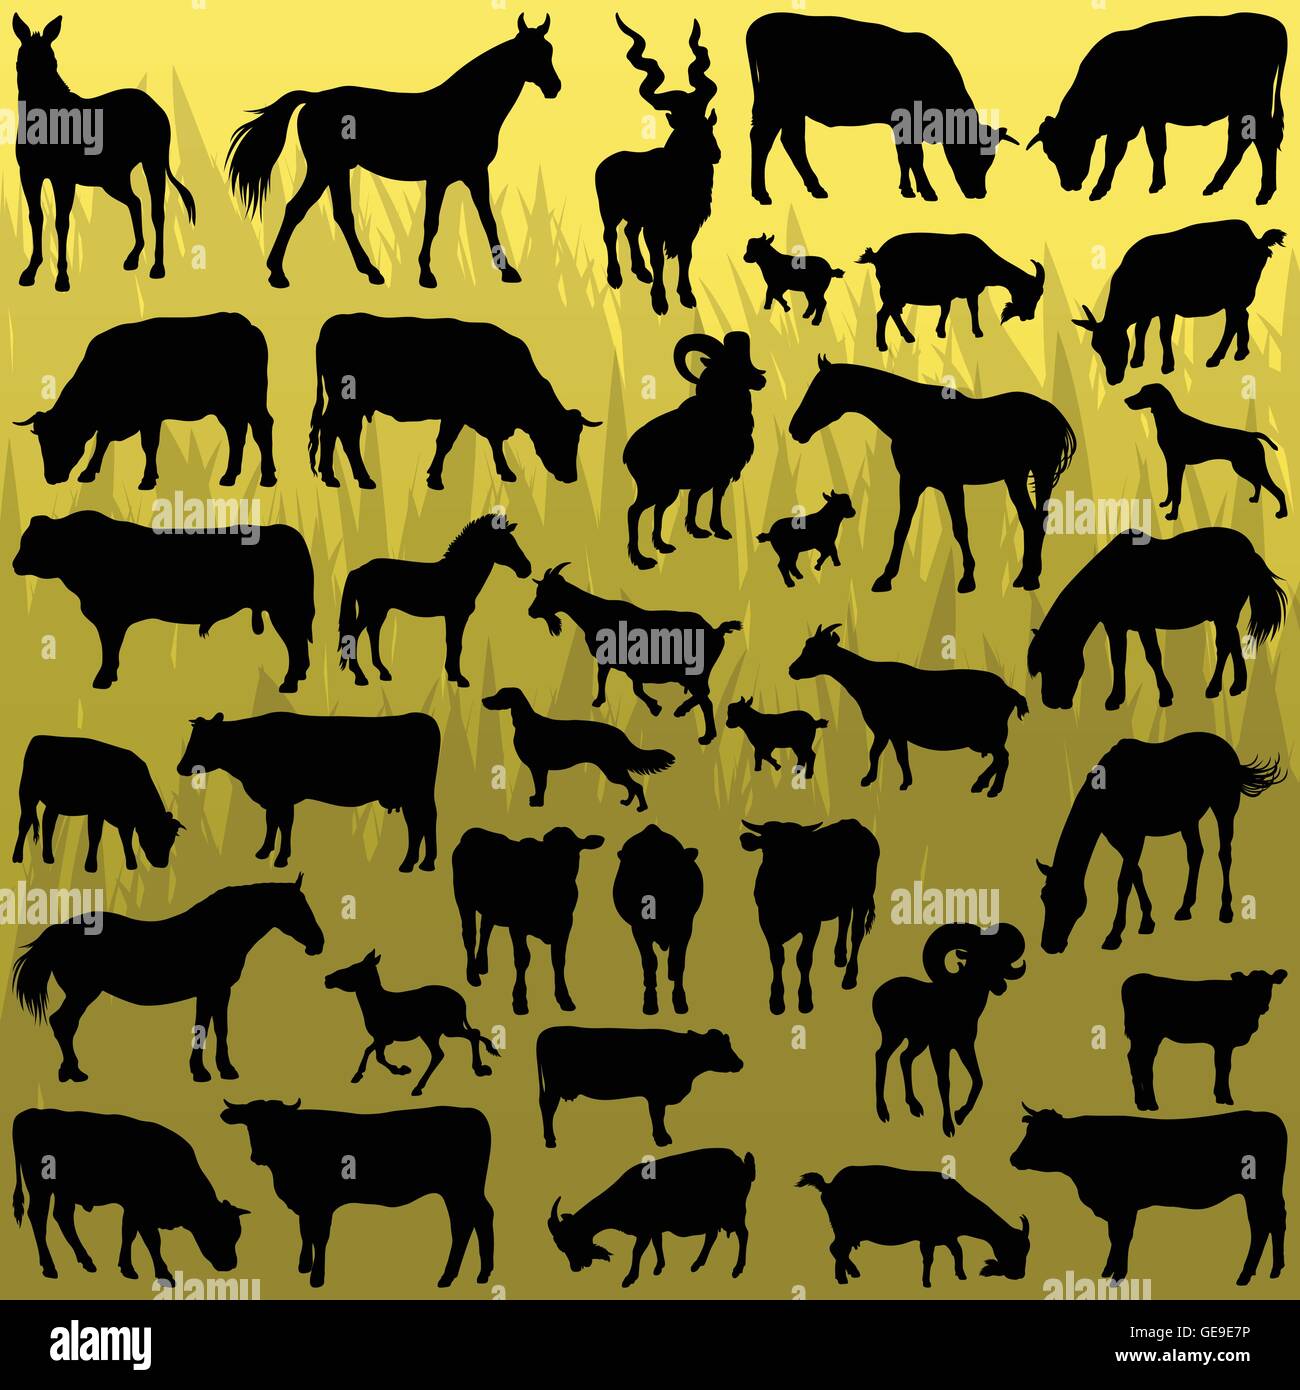 Big farm animals detailed silhouettes illustration collection background vector Stock Vector